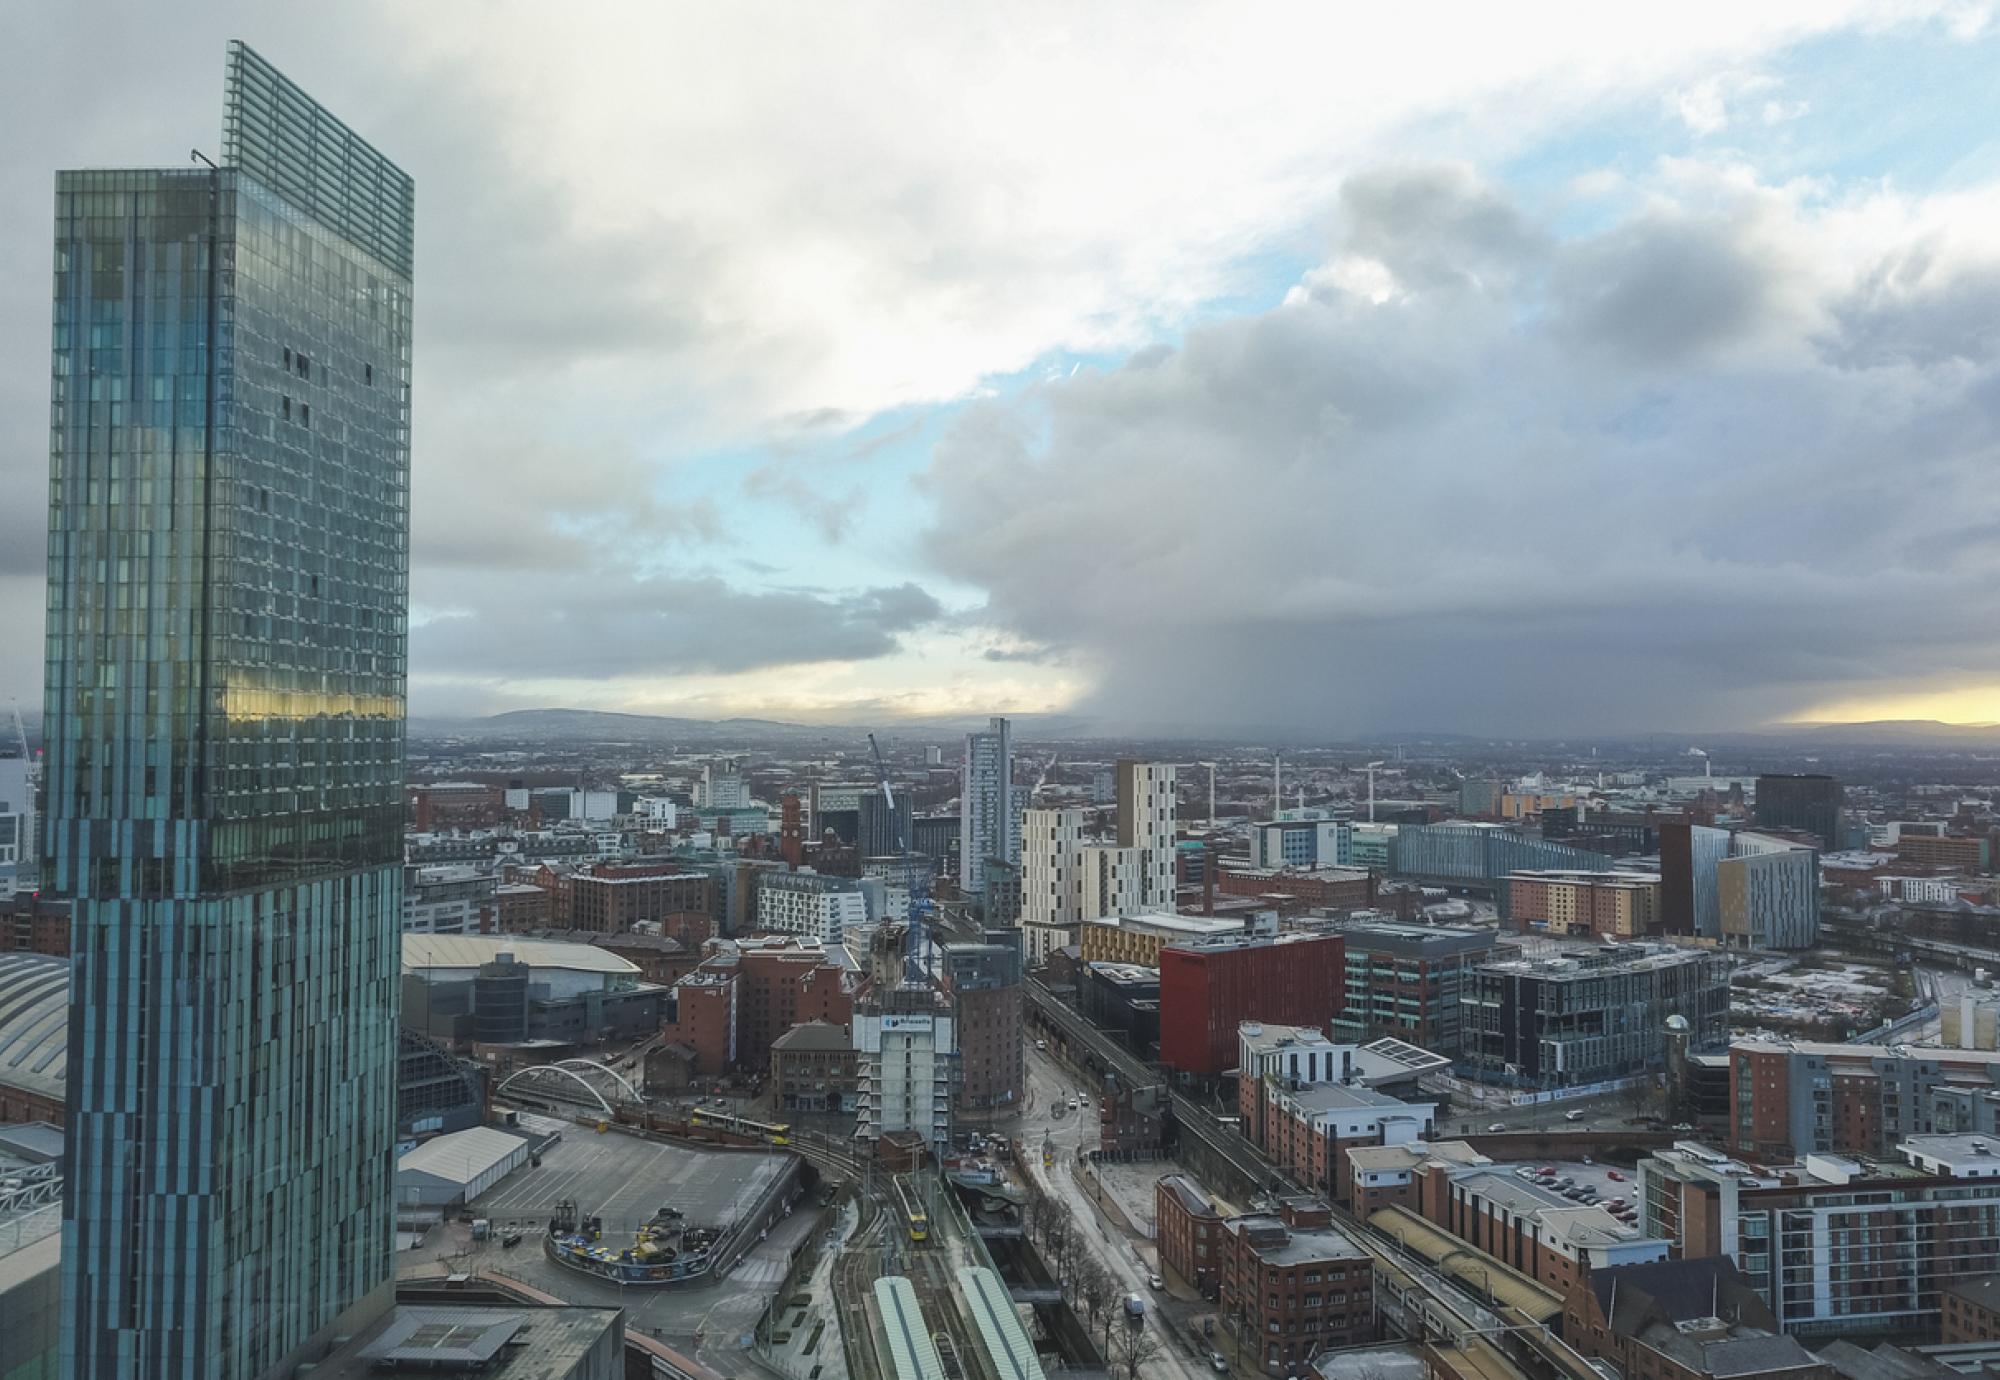 Manchester skyline with beetham tower in foreground